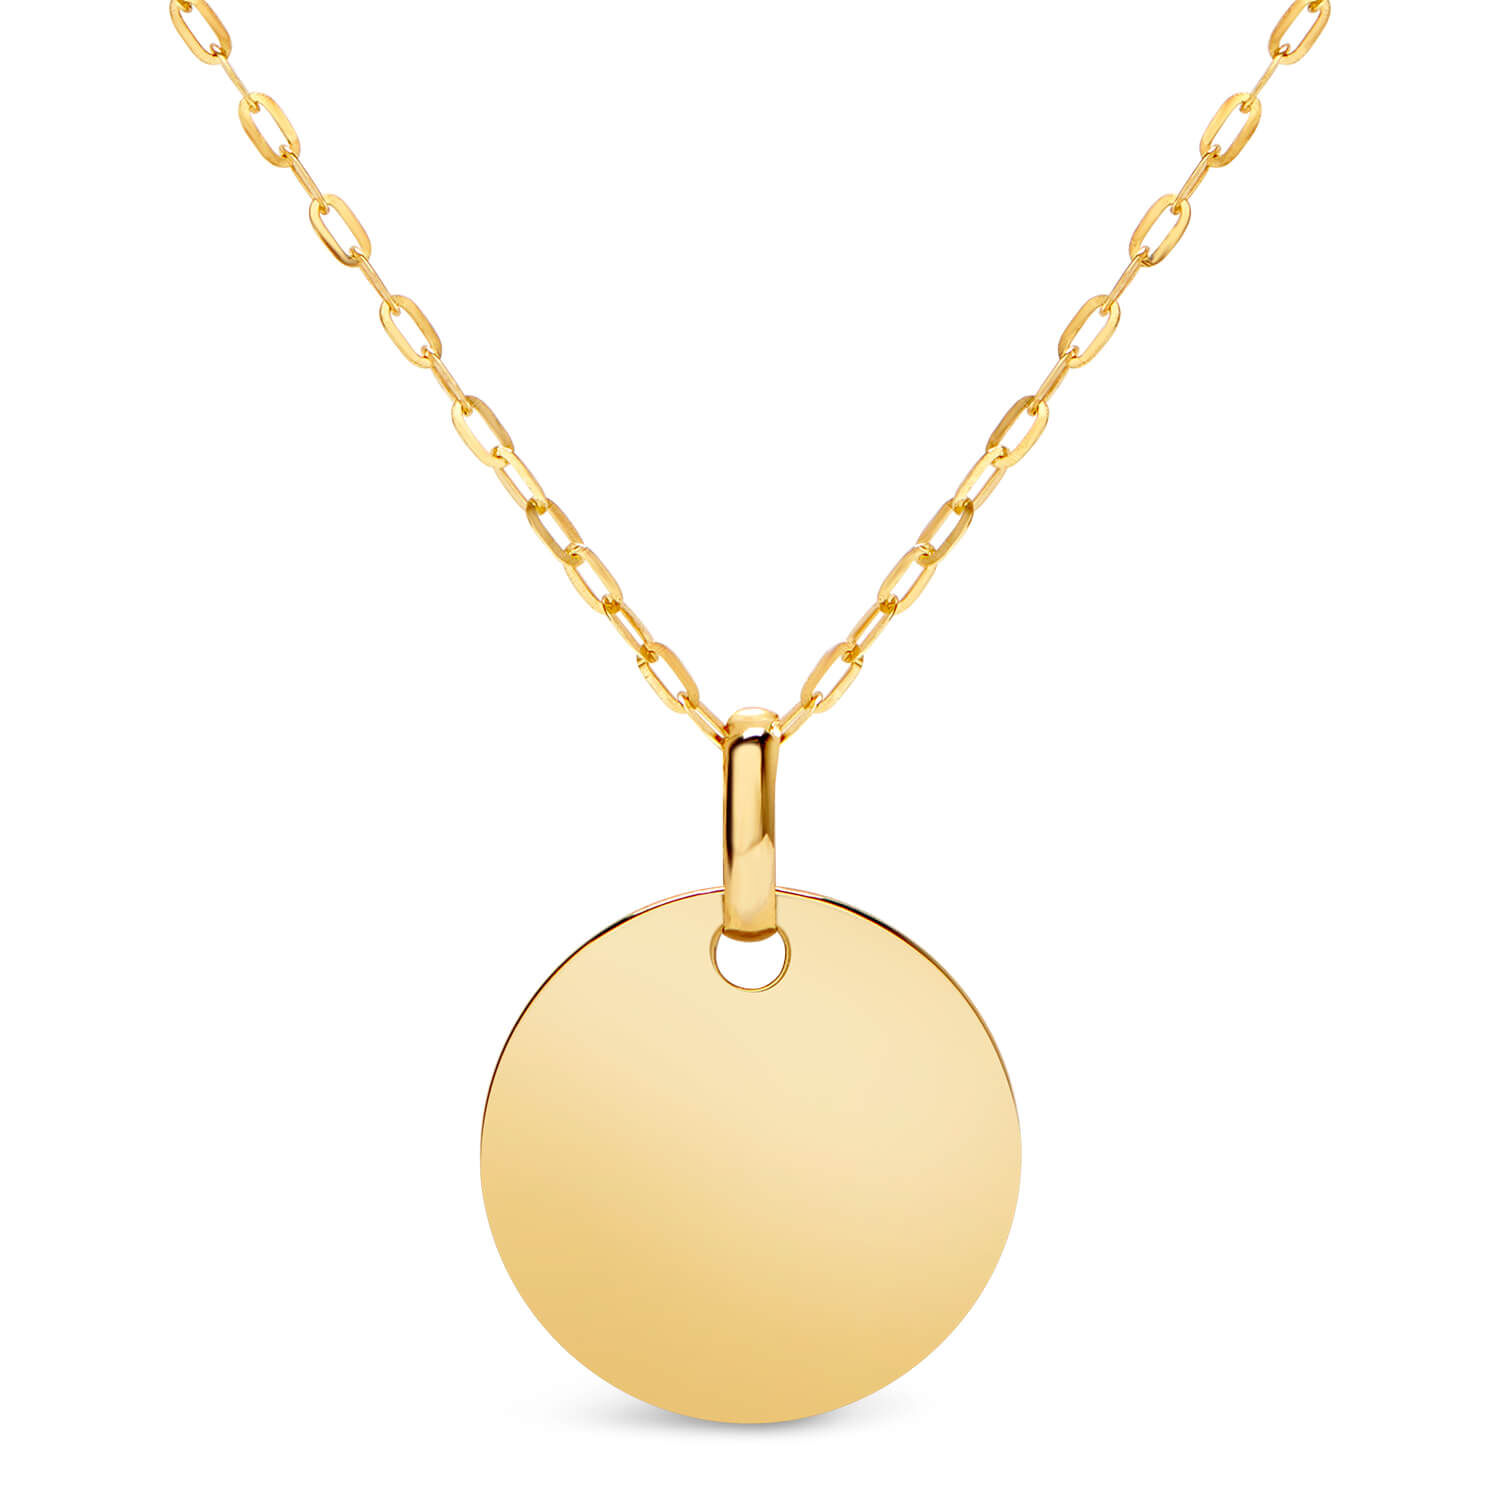 Personalised 9ct Gold Mini Hammered Disc Necklace | Posh Totty Designs